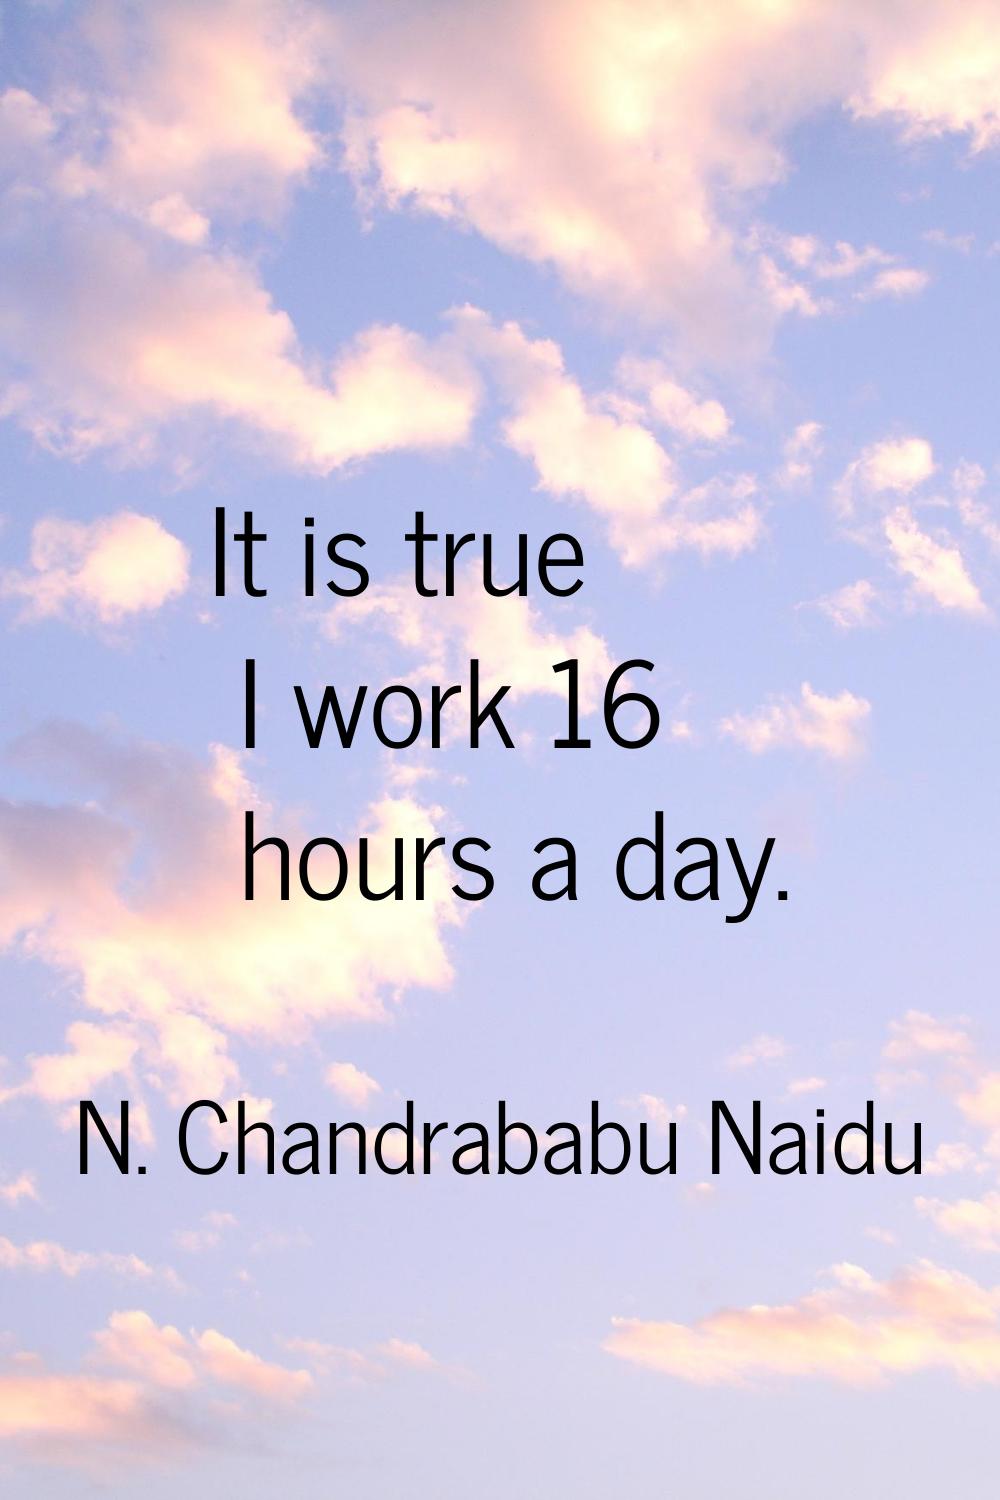 It is true I work 16 hours a day.